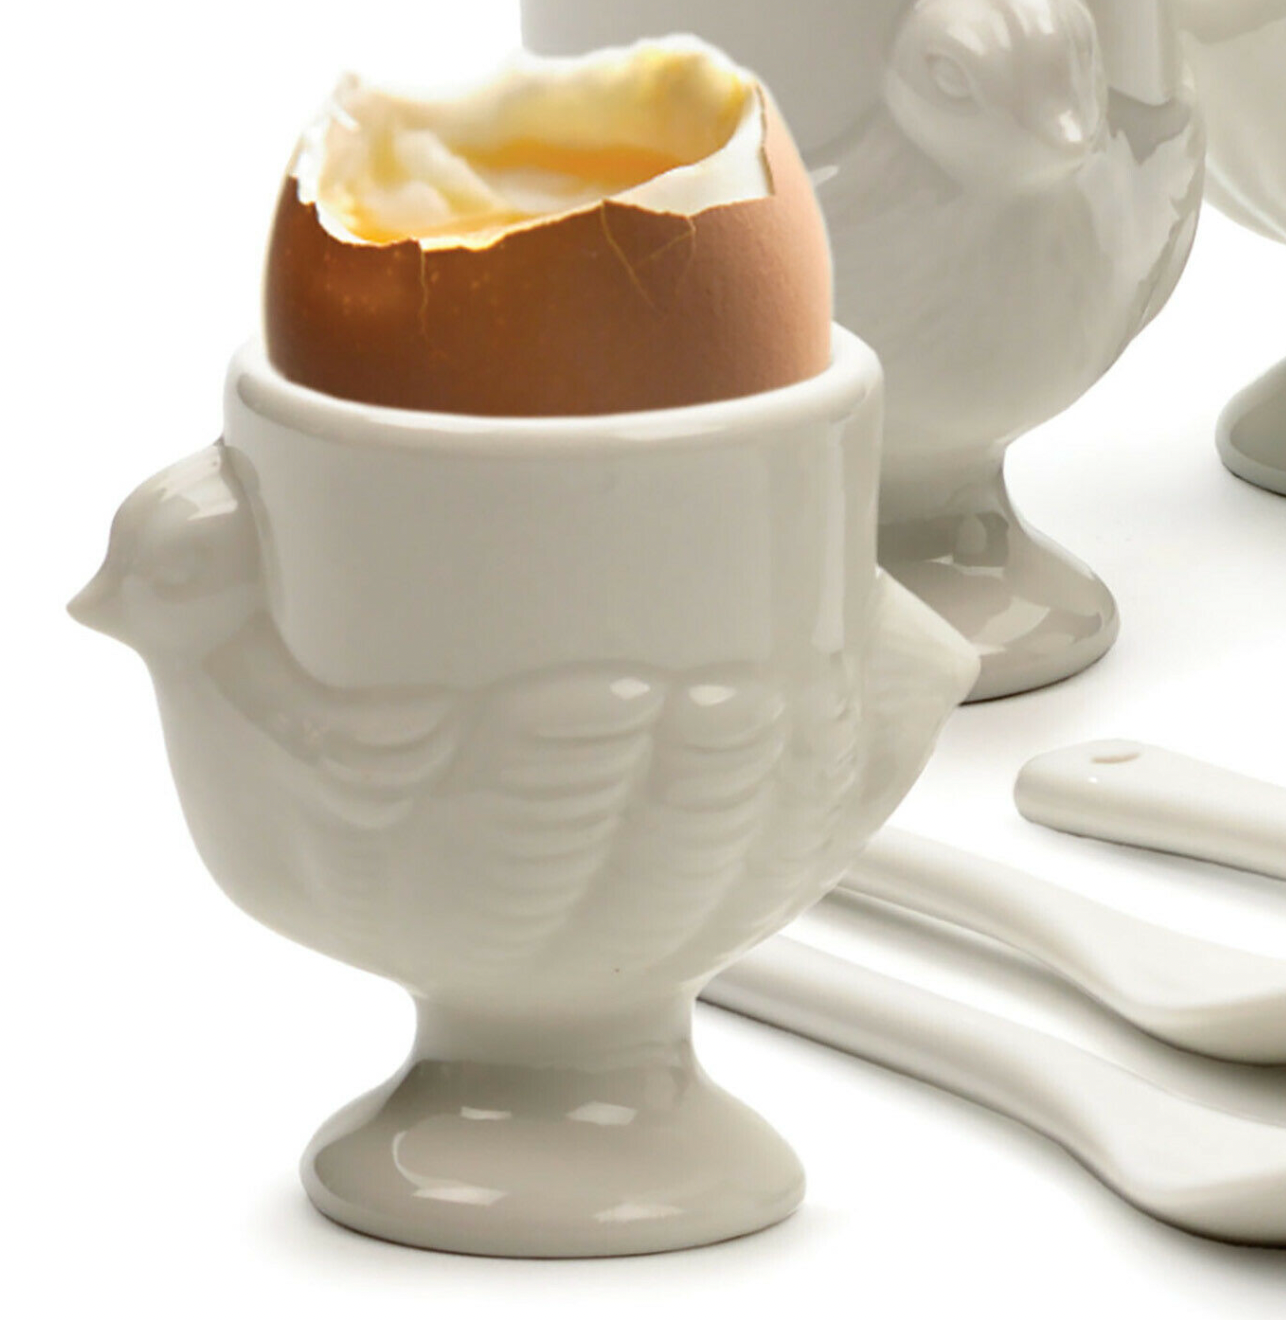 Porcelain Egg Cup & Spoon Set in White – 8 pc set